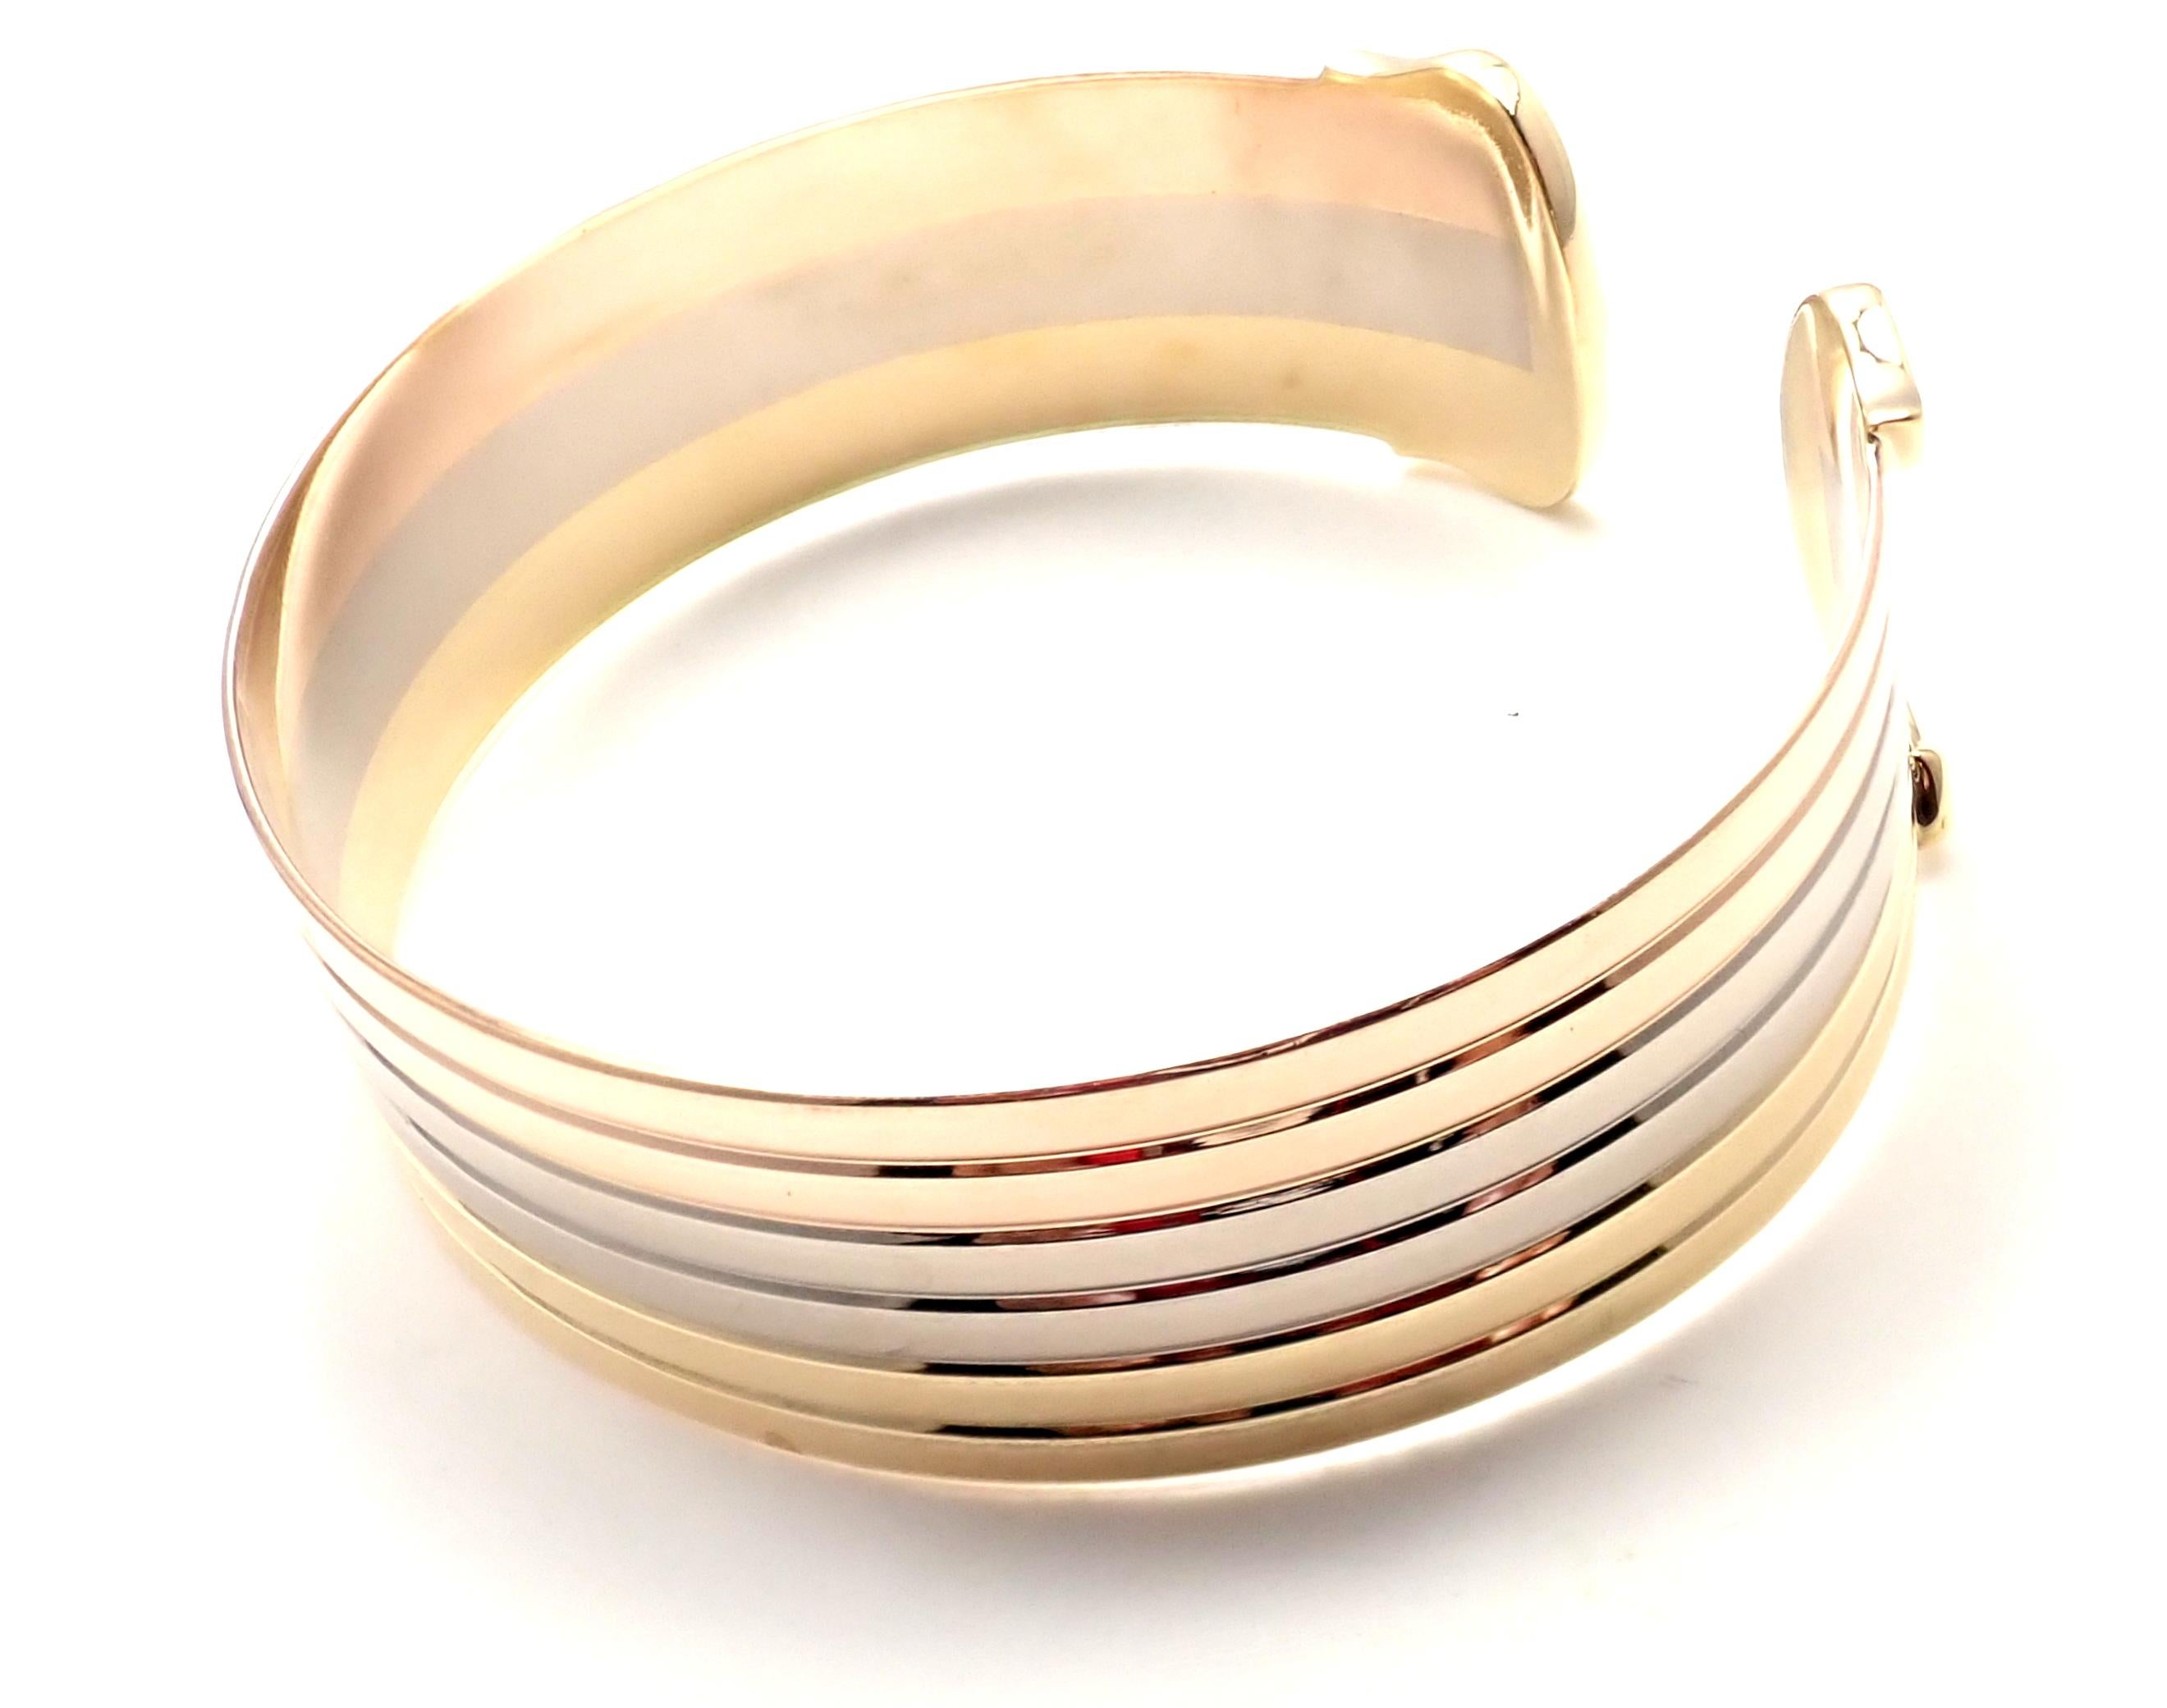 18k Tri-Color Gold (Yellow, White, Rose)  Double-C Bangle Cuff Bracelet by Cartier. 
Details: 
Weight: 32.7 grams
Length: 7